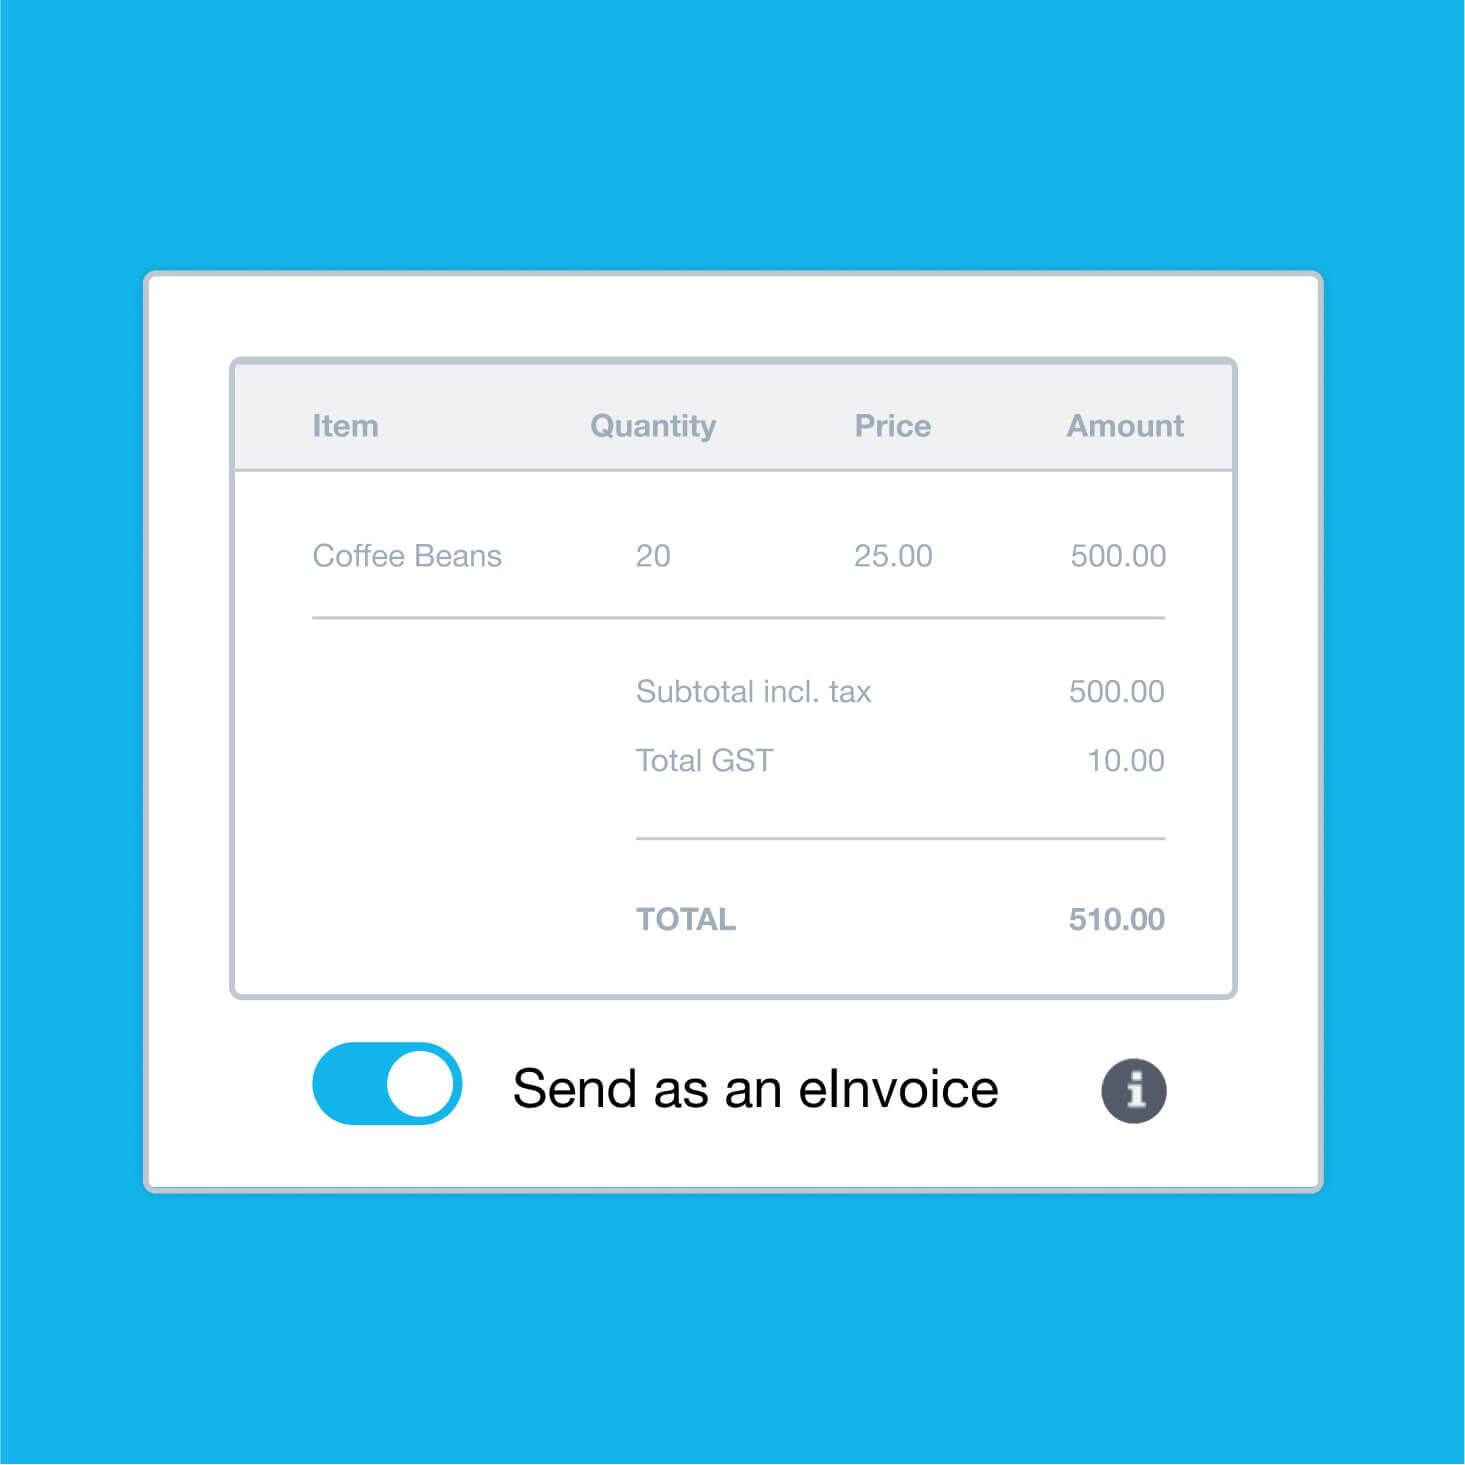 Electronic invoicing software shows a ‘Send as an e-invoice’ button so you can invoice directly.